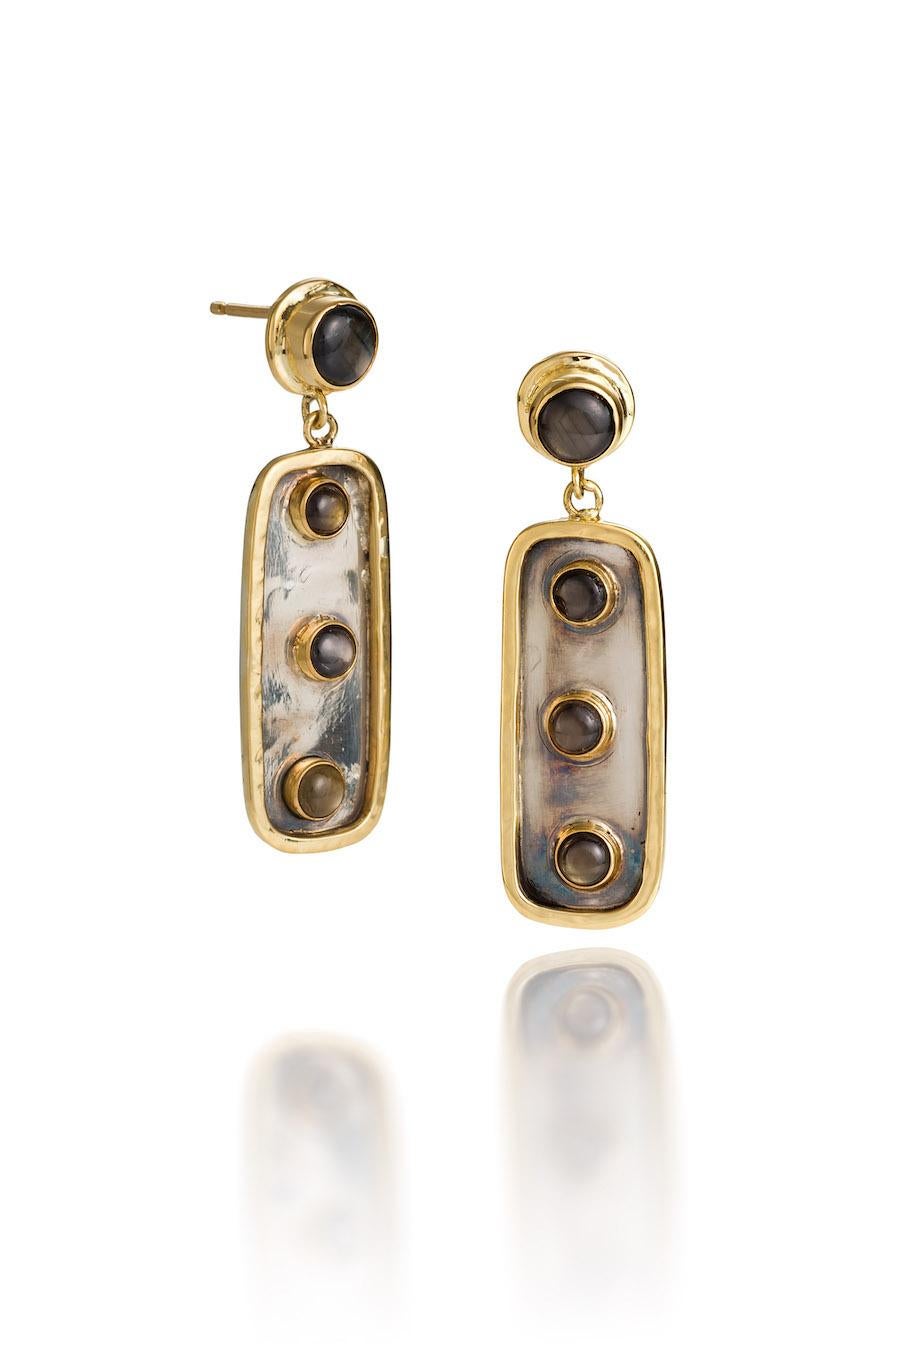 18KY, Oxidized Silver and Black Star Sapphire earrings are one-of-a-kind earrings.
Calder meets West African art was the inspiration for these Primitive/Modern earrings.  The Black Star Sapphires set in 18KY gold bezels catch the light and pop